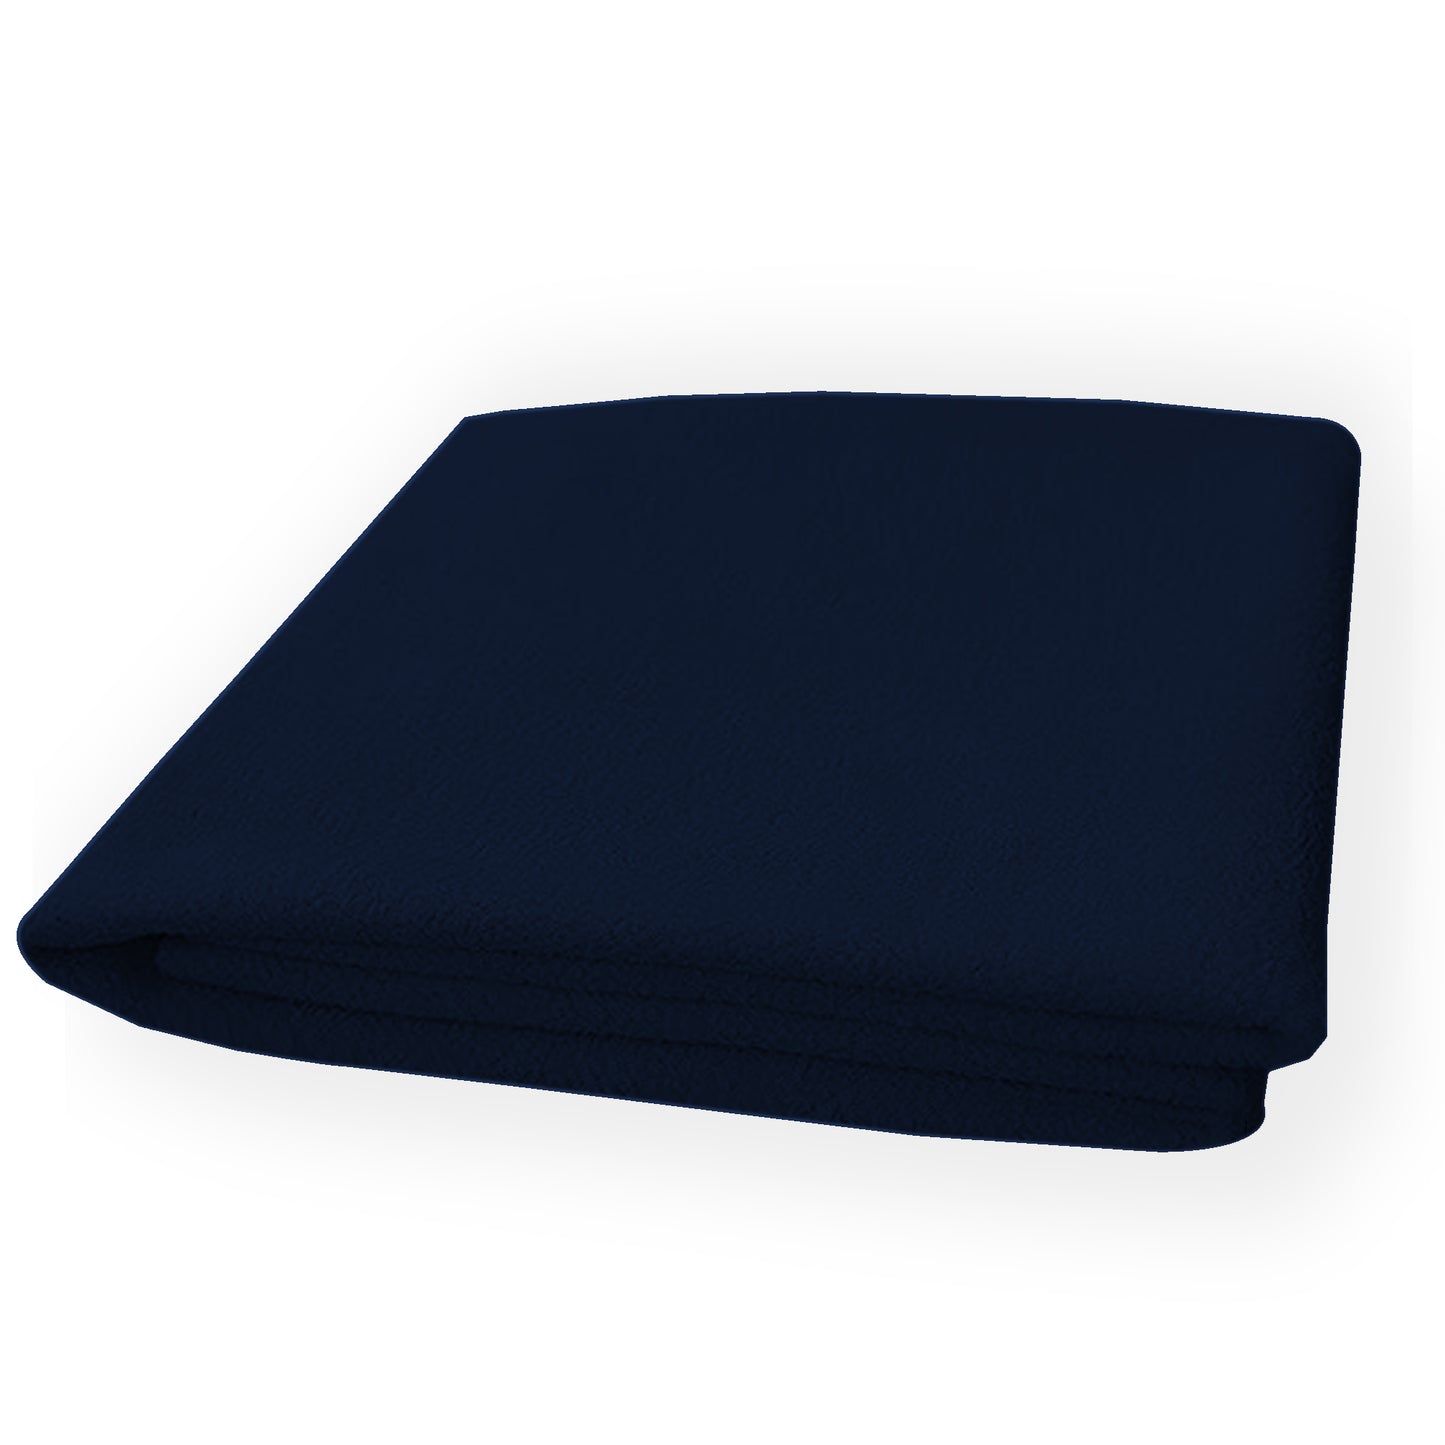 Waterproof Quick Dry Protector Sheet, Baby Bed Protector (140 X 100 CM), Pack of 1 -NAVY BLUE